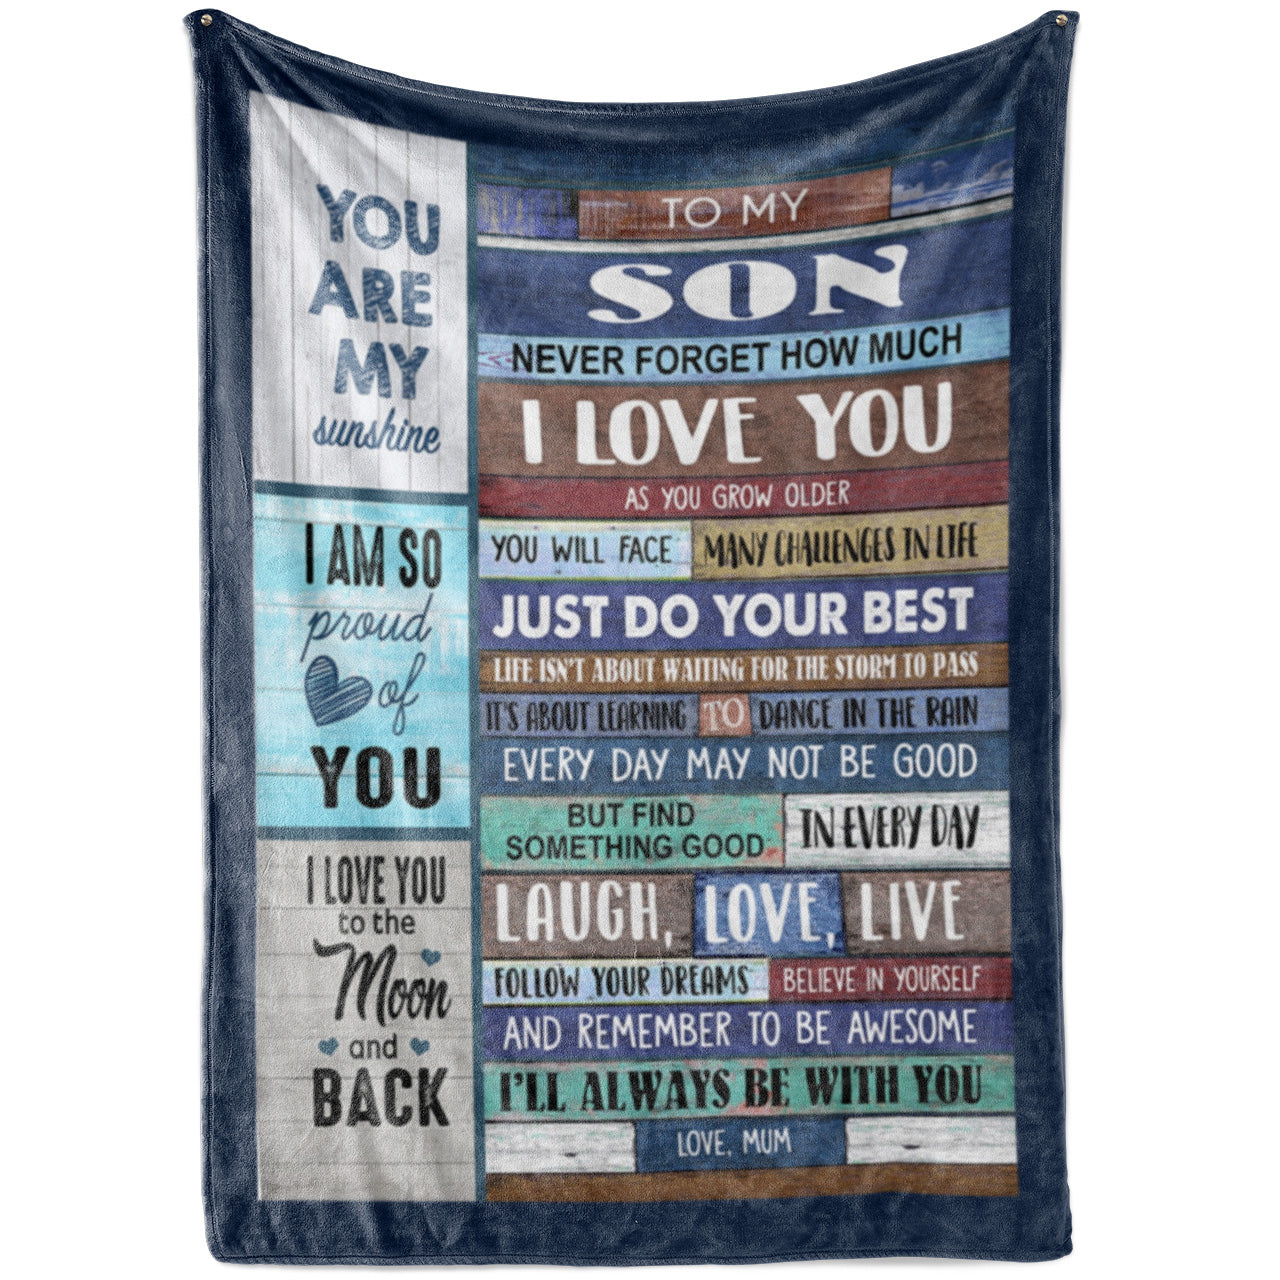 Buy Gift for Son Blanket - Birthday Gifts for Son - Graduation Gifts for Son  - Son Gifts from Mother for His Birthday - to My Son - Best Gift Ideas for